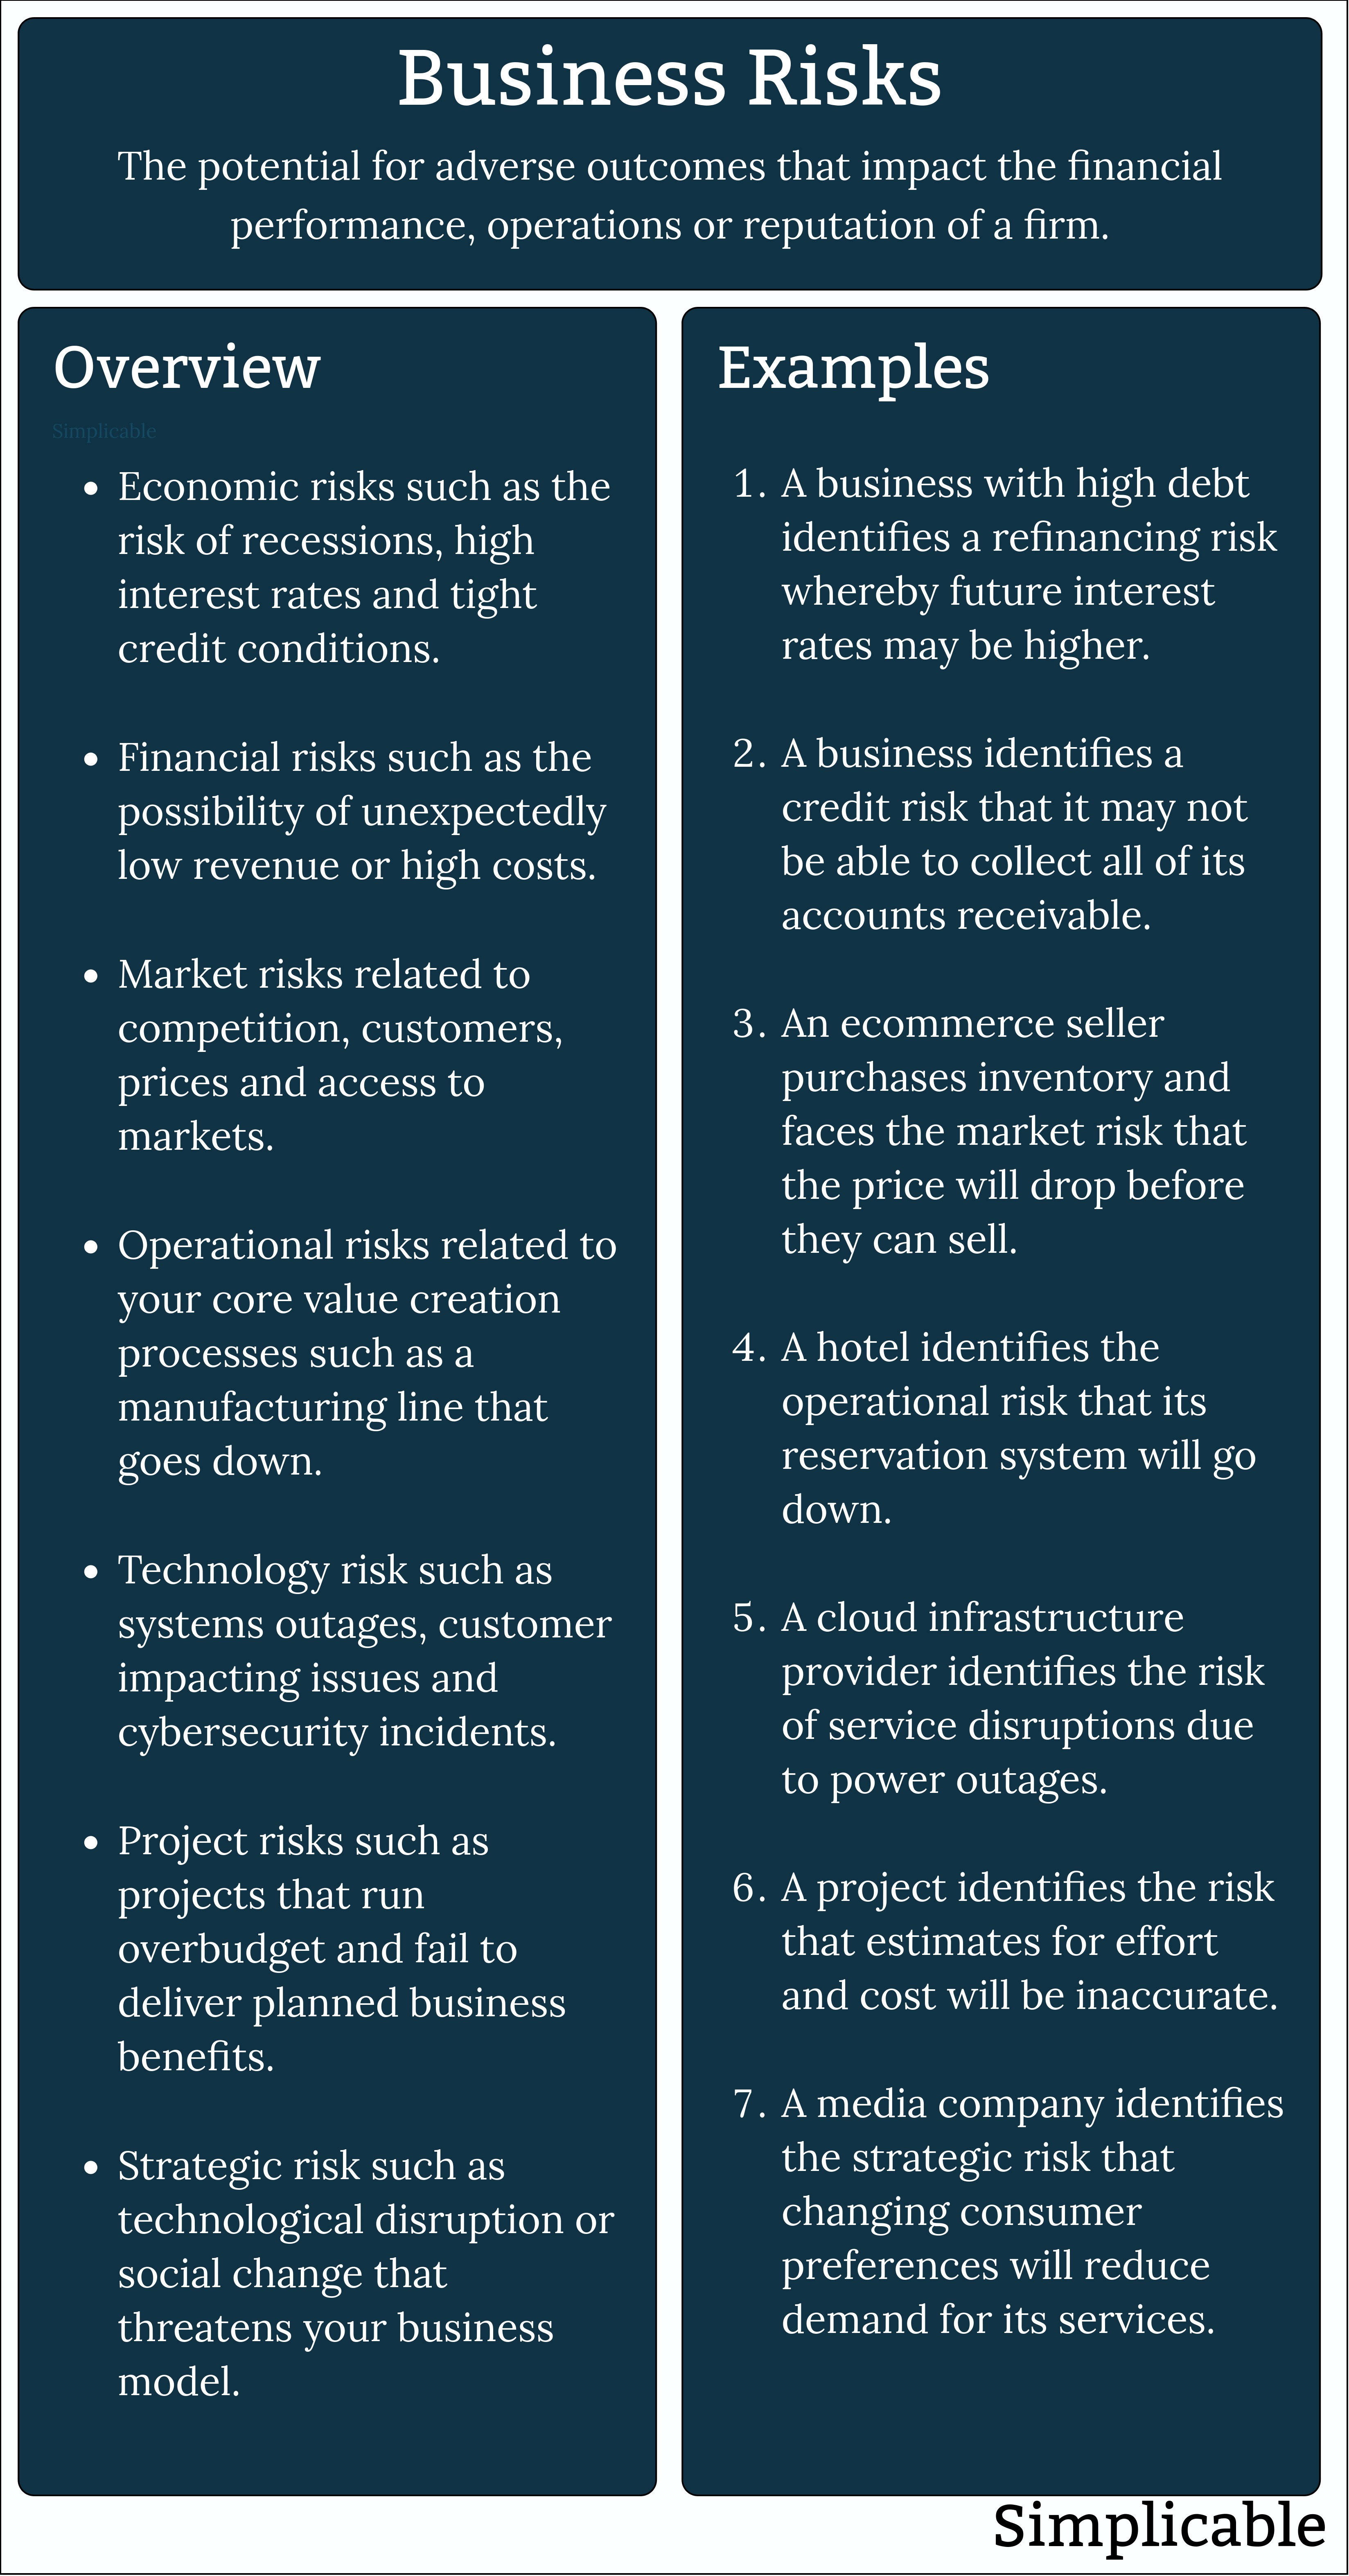 business risk overview and examples